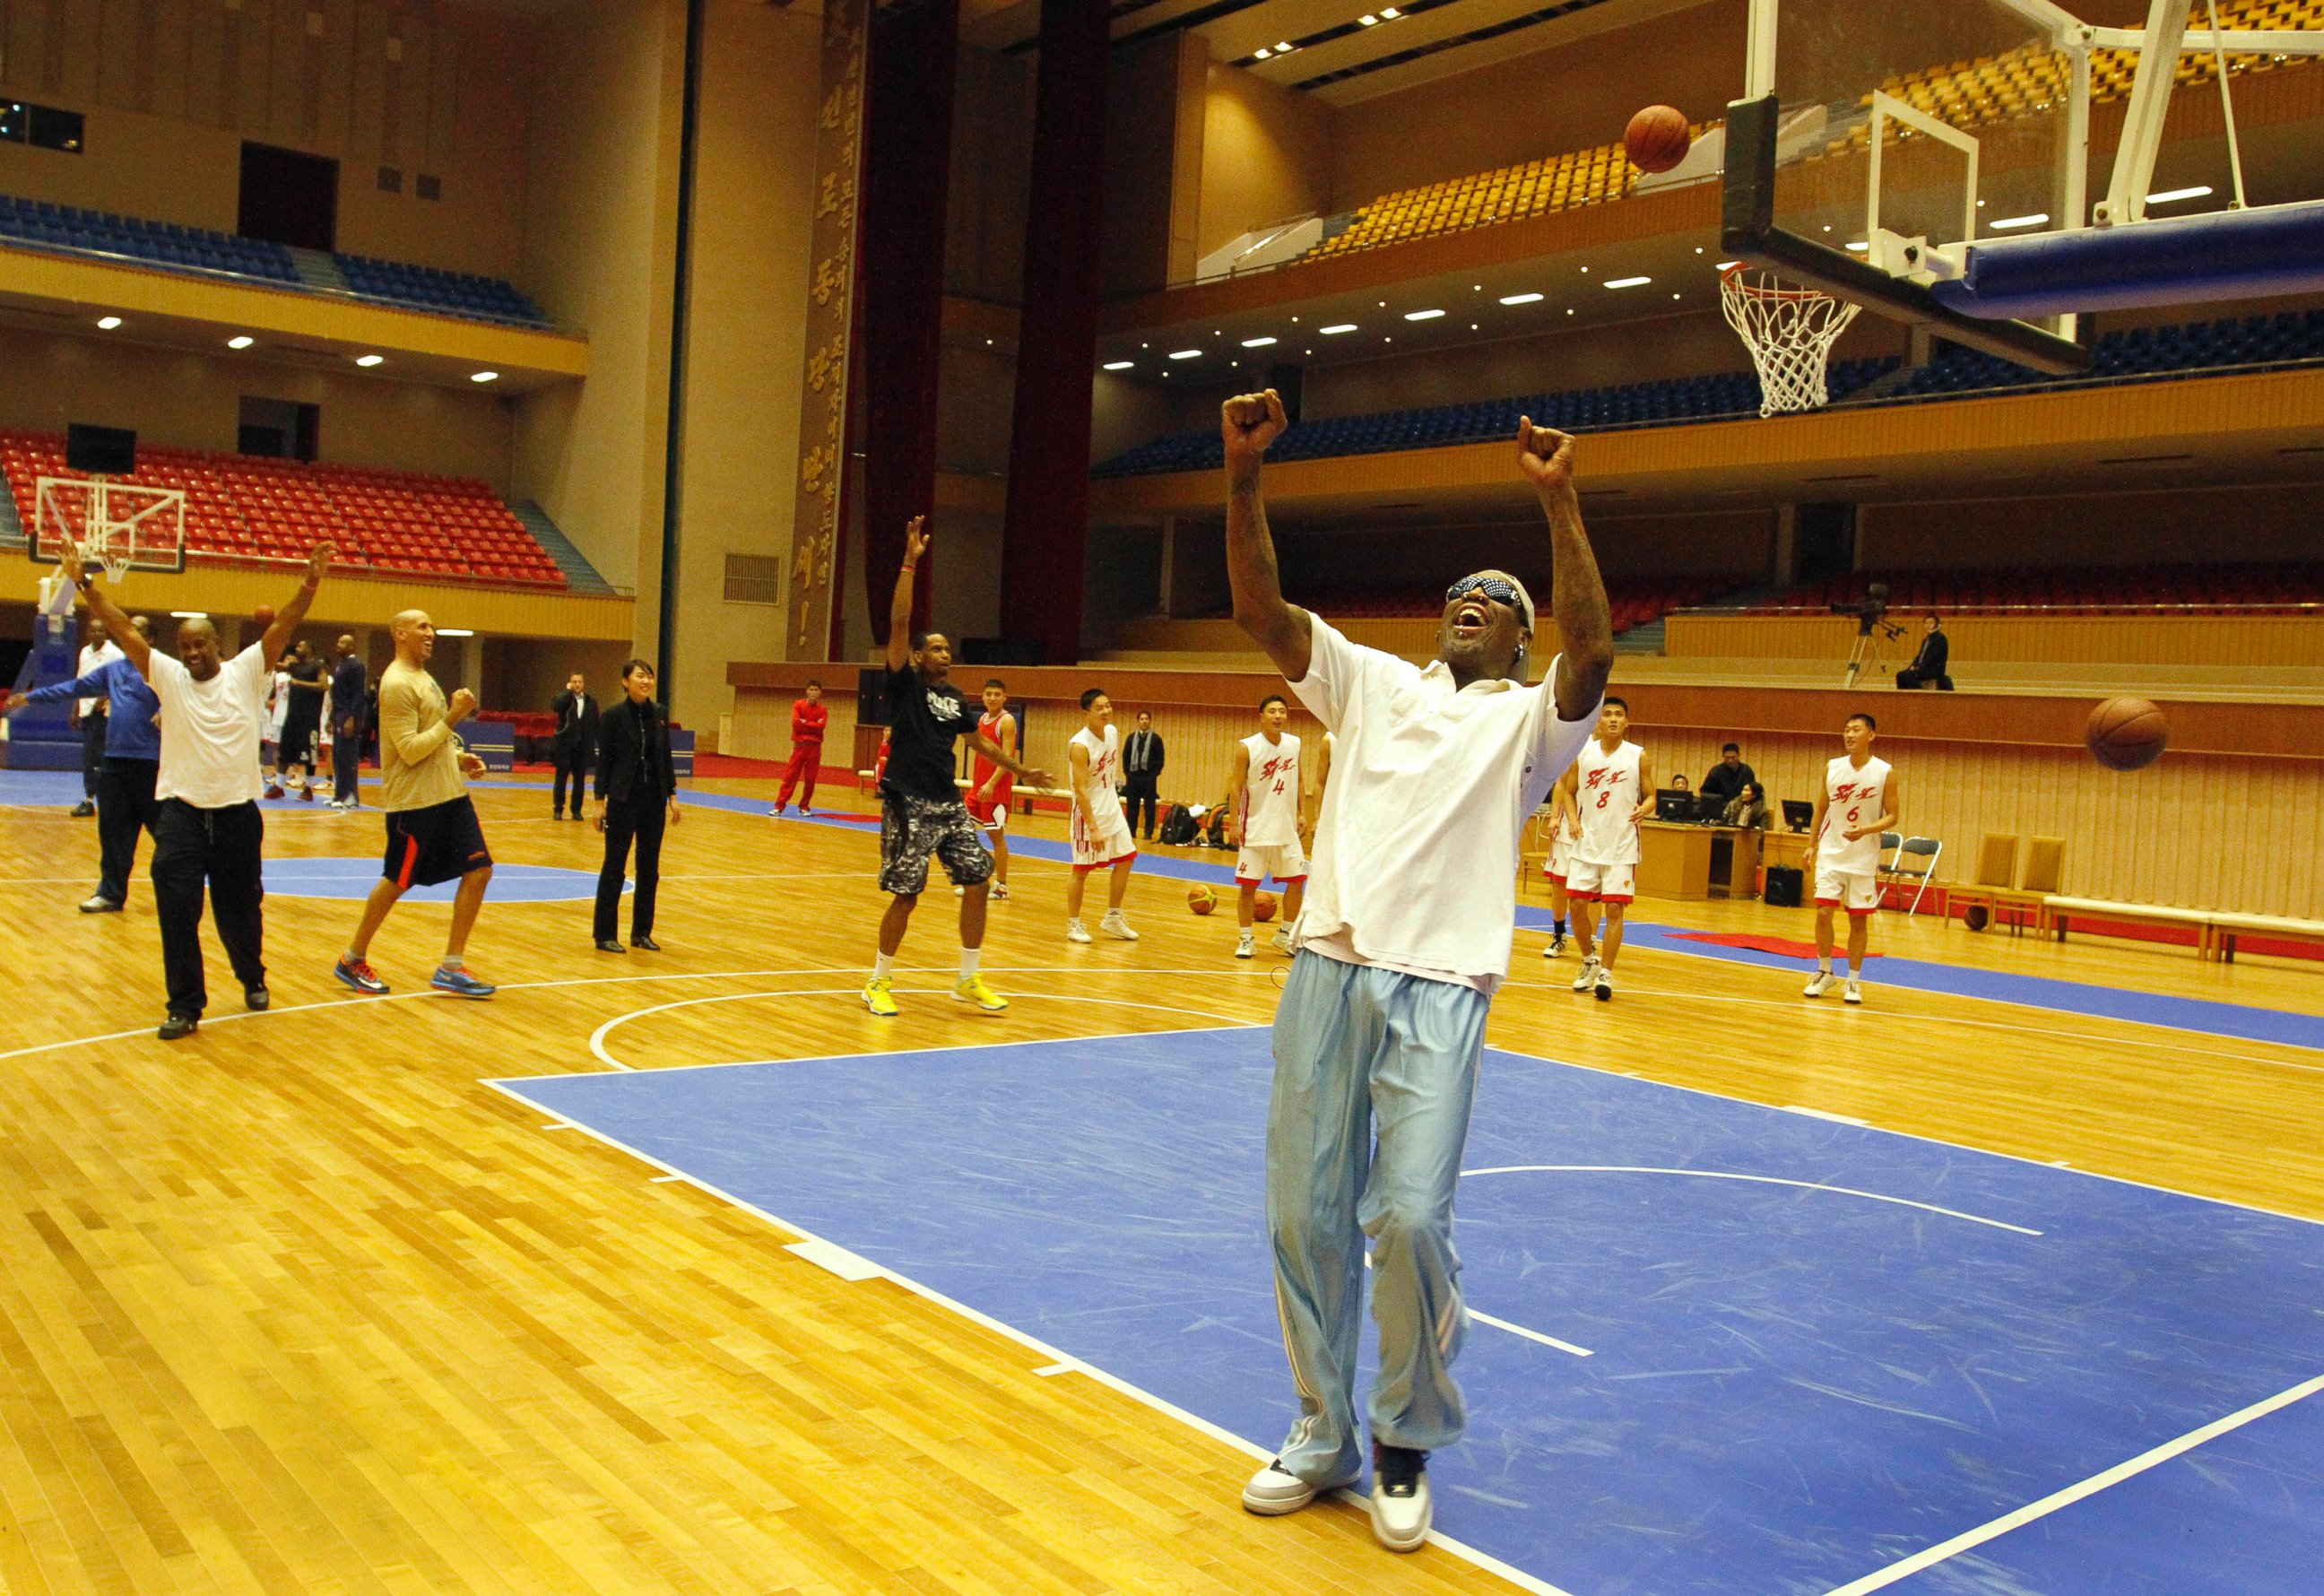 PHOTO: Dennis Rodman cheers after a fellow U.S. basketball player makes a jump shot during a practice session with North Korean players in Pyongyang, North Korea on Jan. 7, 2014. 